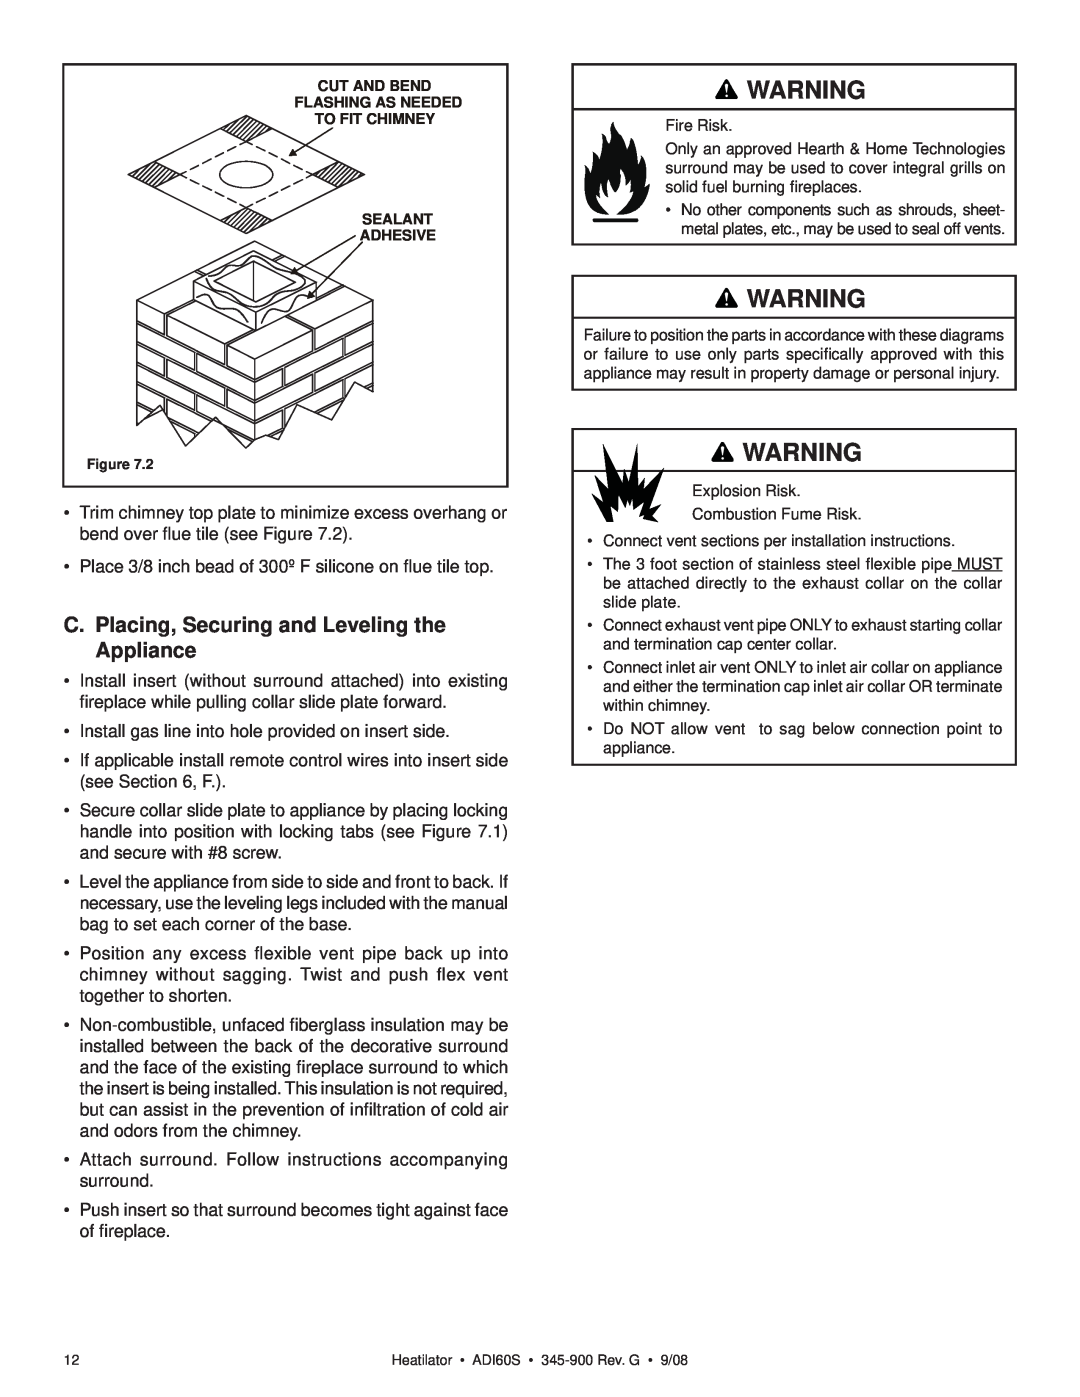 Heatiator ADI60S owner manual C.Placing, Securing and Leveling the Appliance 